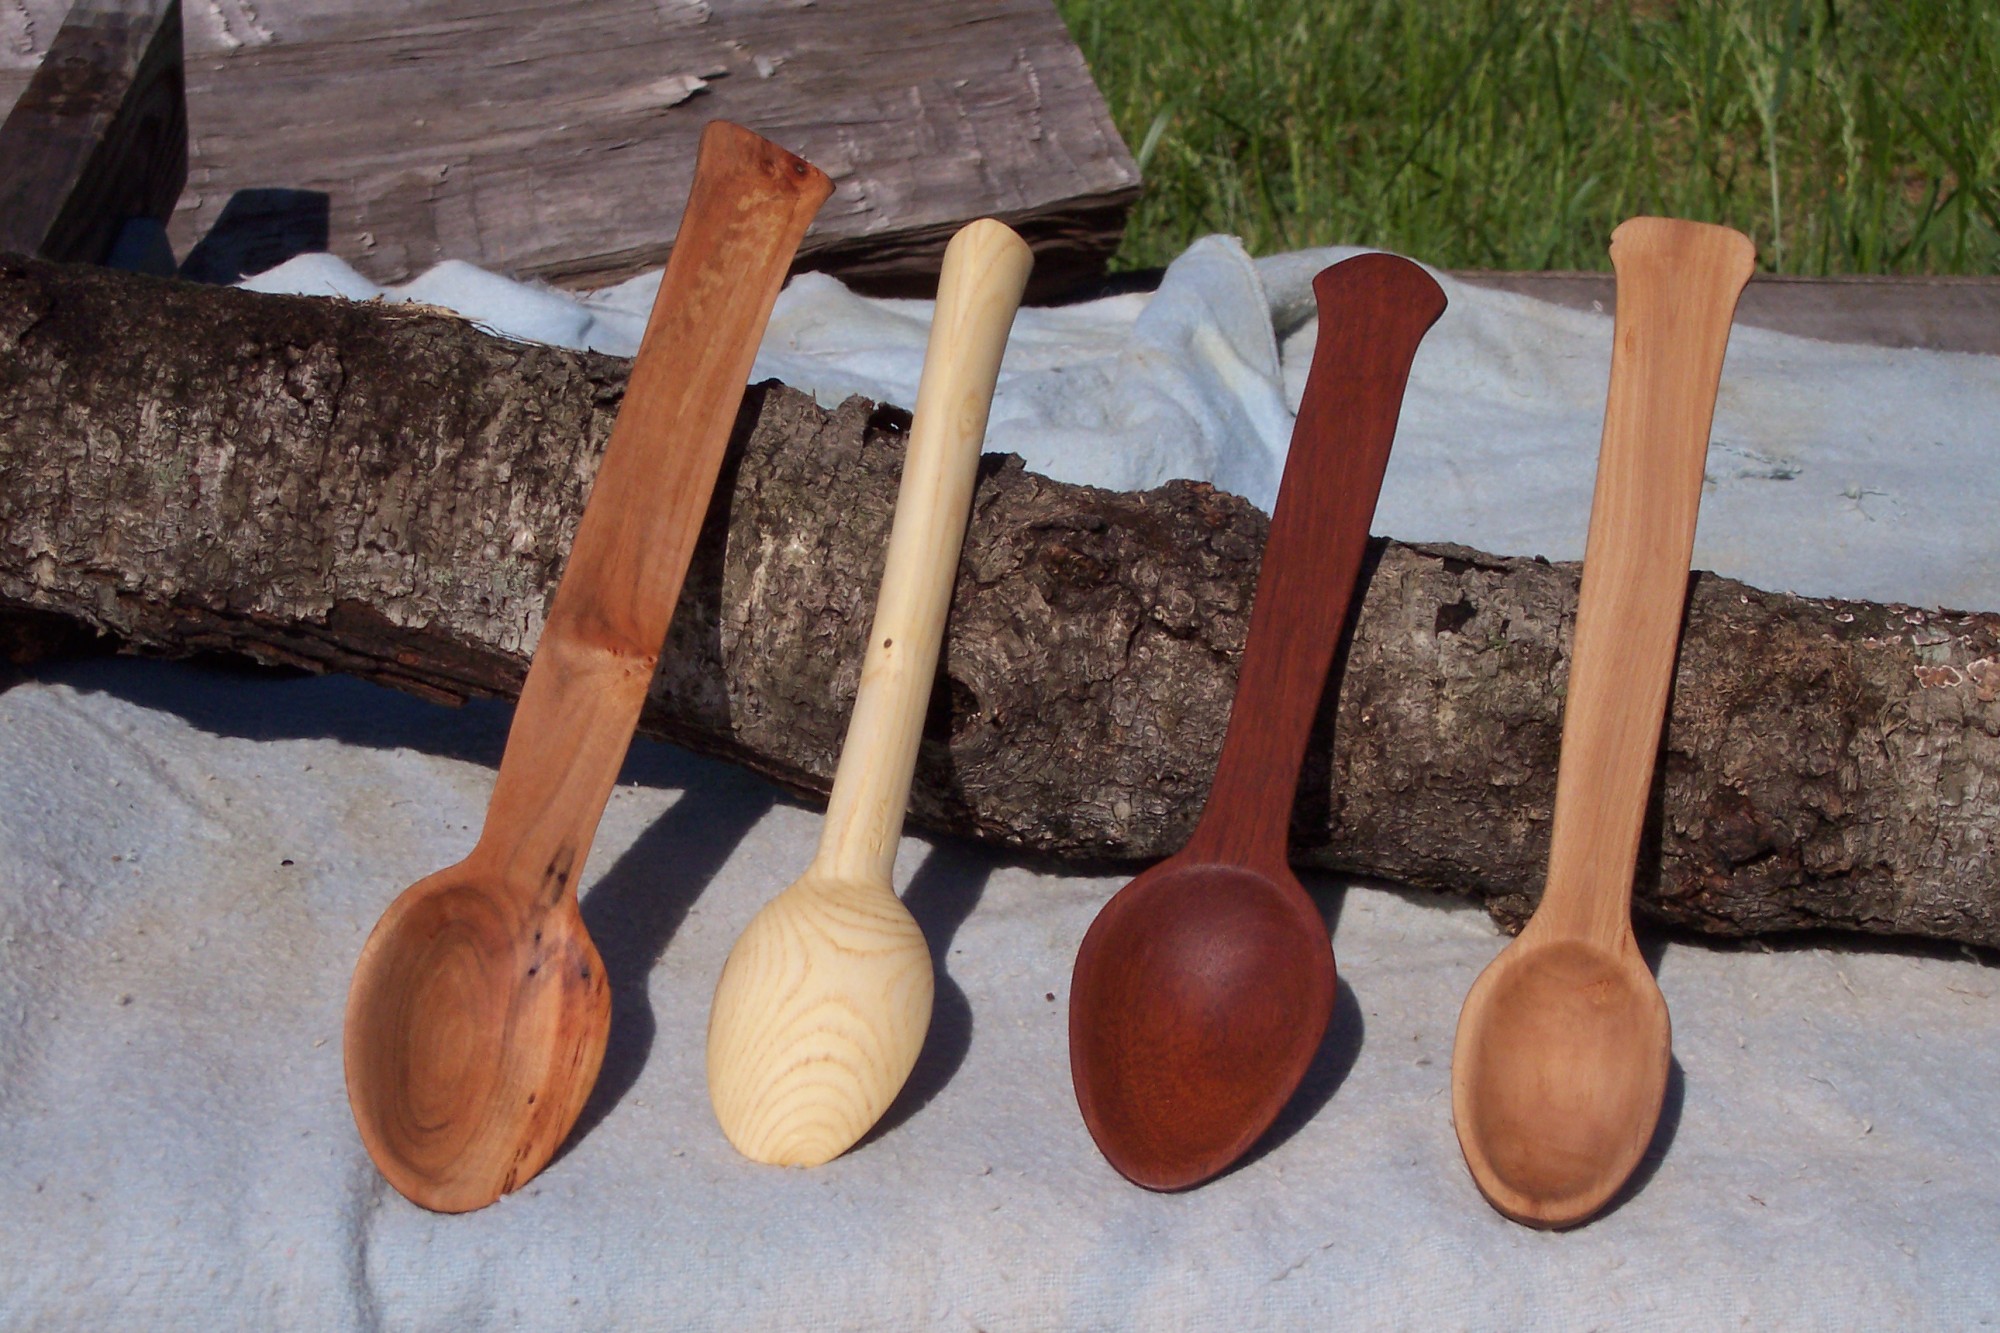 Multi-axis turned spoons